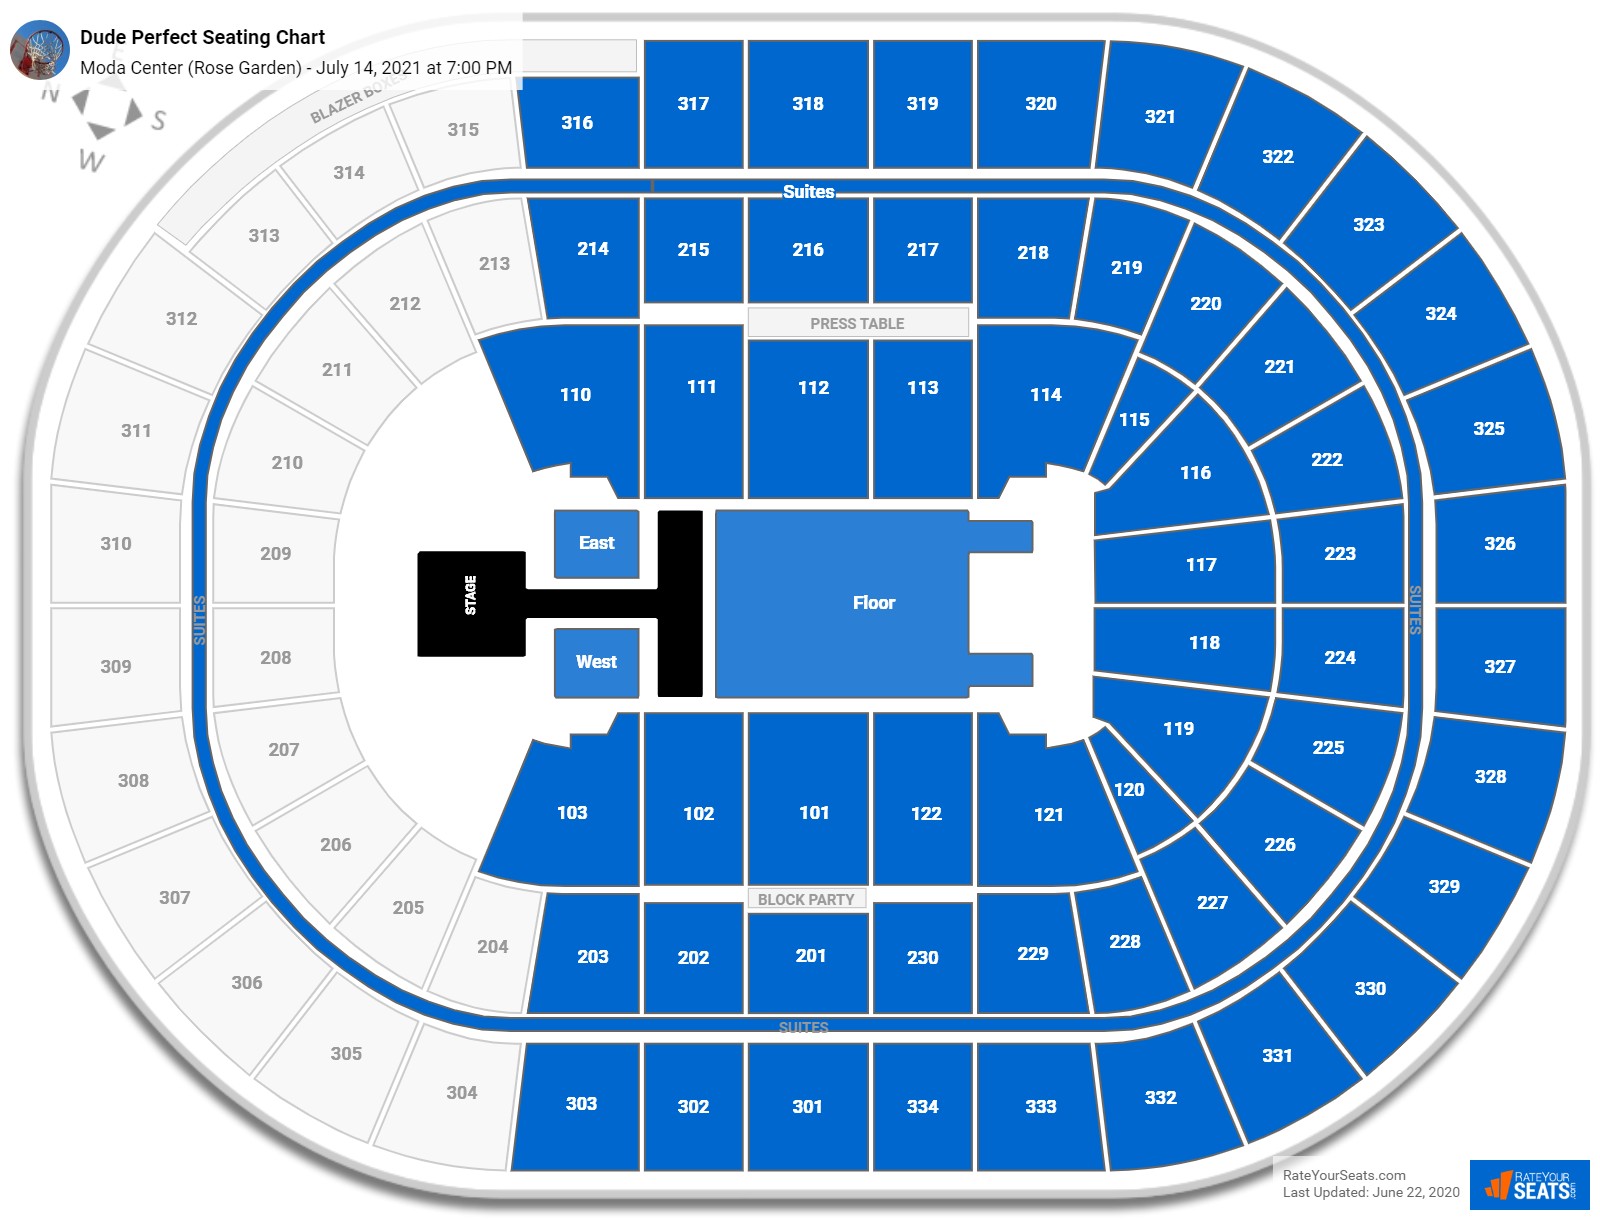 Dude Perfect Moda Center Seating Chart July 14 2021 3354250 